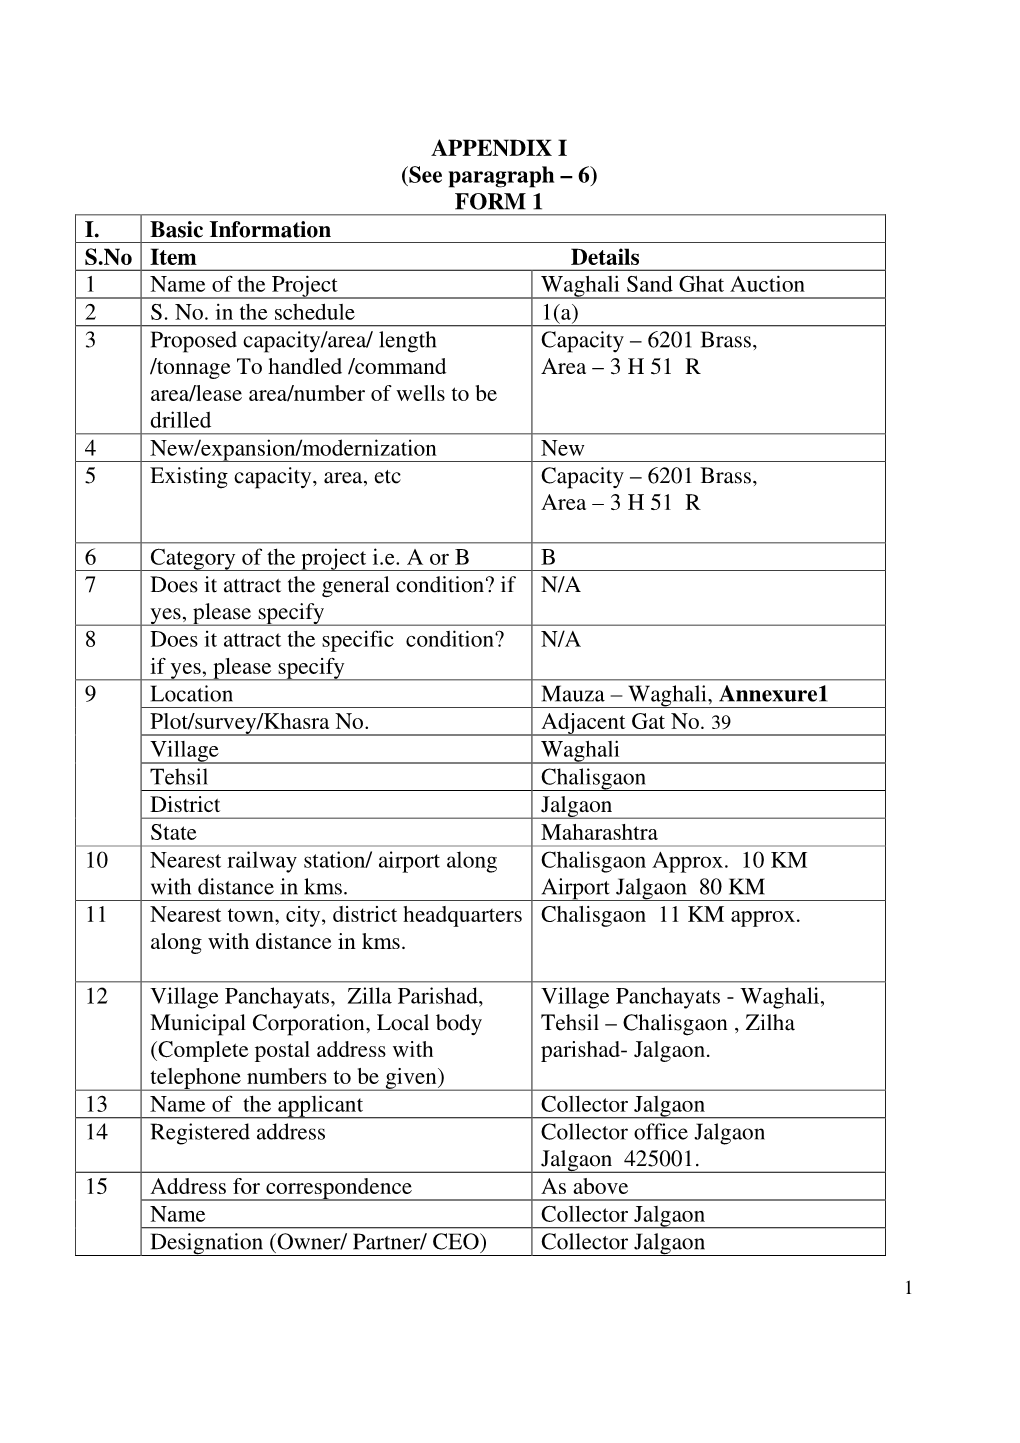 FORM 1 I. Basic Information S.No Item Details 1 Name of the Project Waghali Sand Ghat Auction 2 S